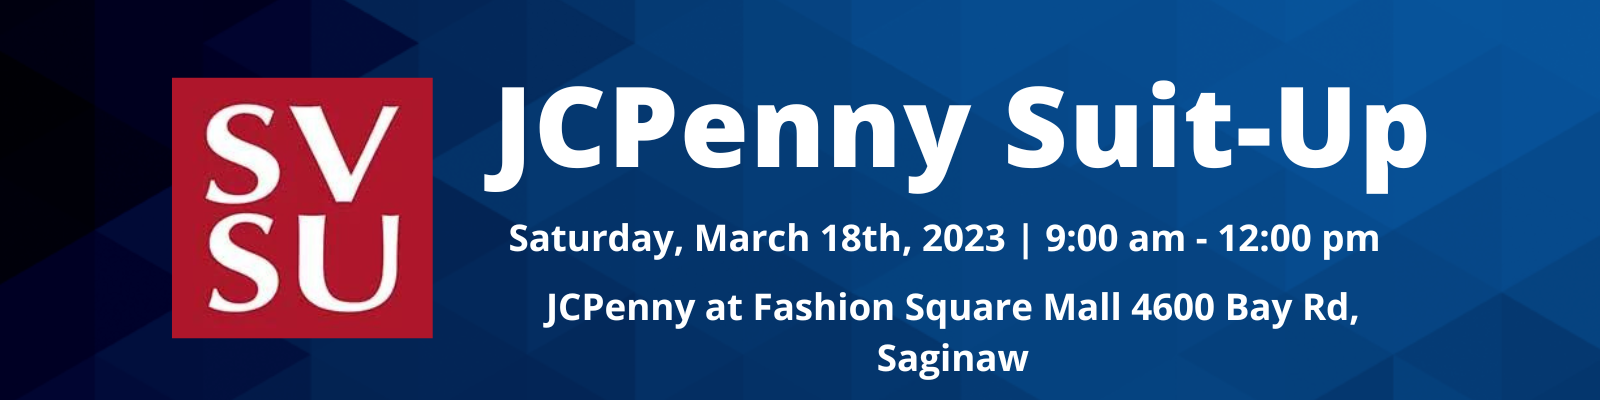 JCPenny Suit UP Event March 18